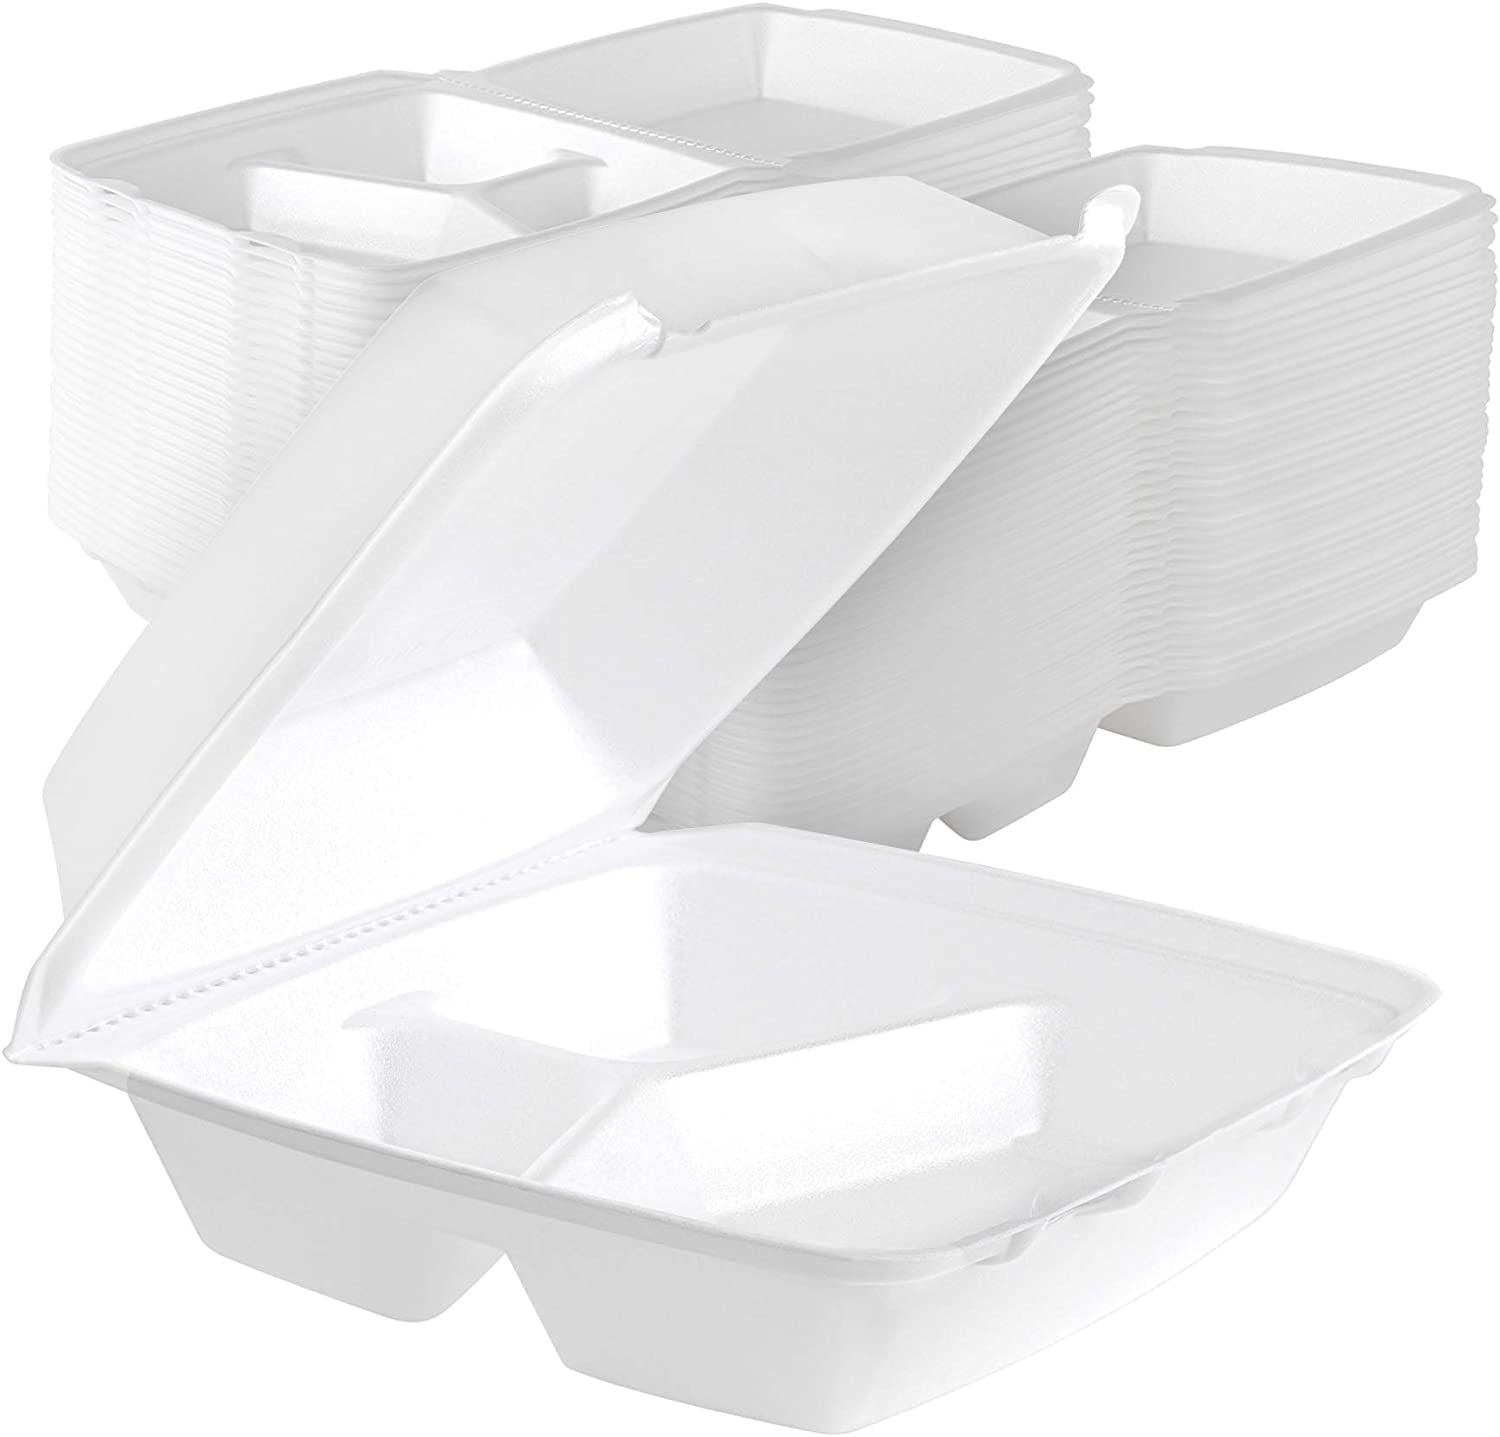 Stock Your Home 8 Inch Clamshell Styrofoam Containers (25 Count) - 3  Compartment Food Containers - Large Carry Out Container for Food - Clamshell  Take Out Containers for Delivery, Takeout, Restaurants 